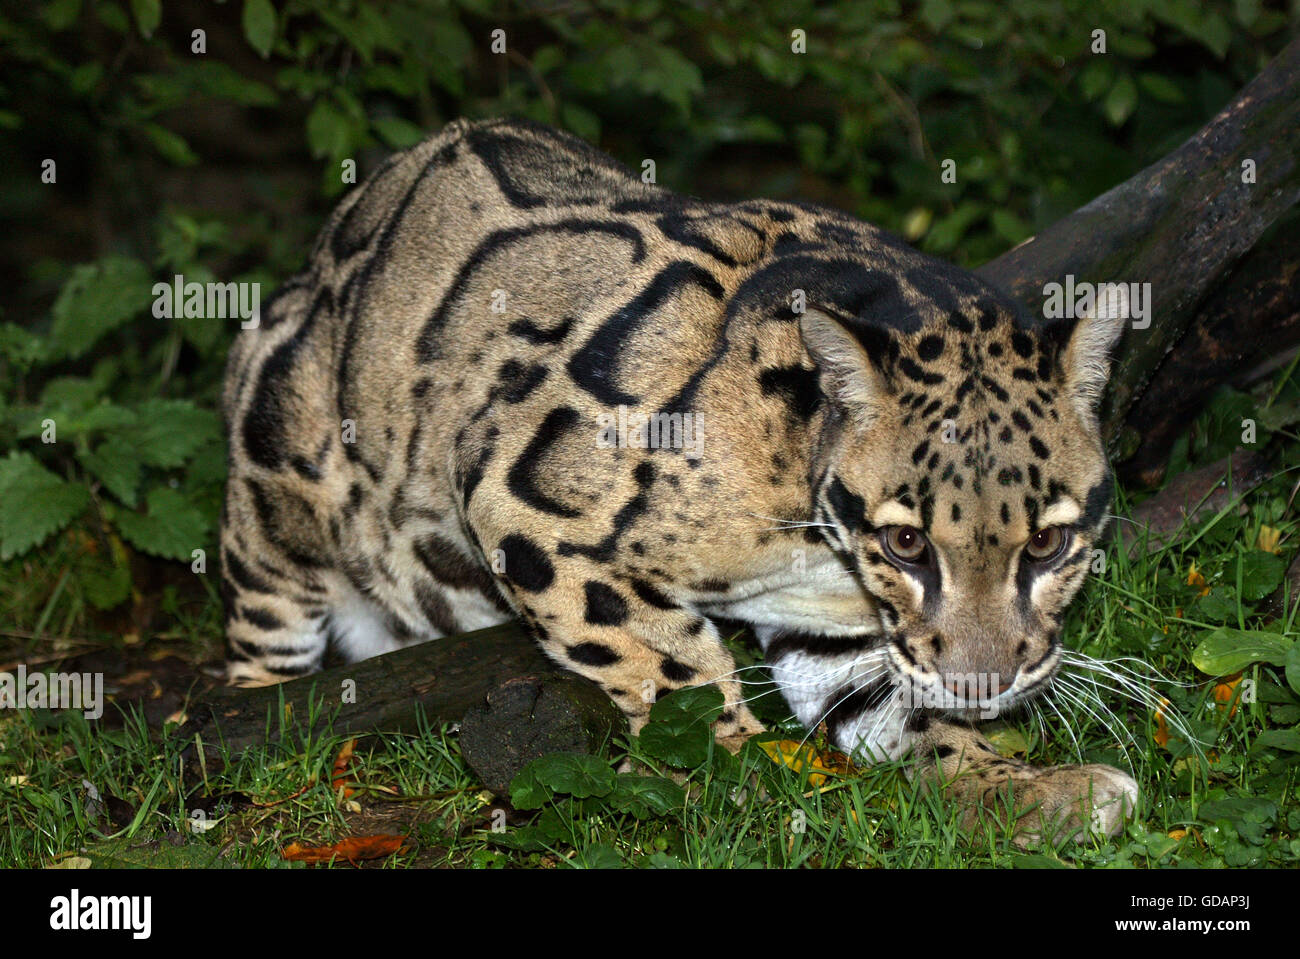 Clouded Leopard, neofelis nebulosa, Adult in Ground Stock Photo